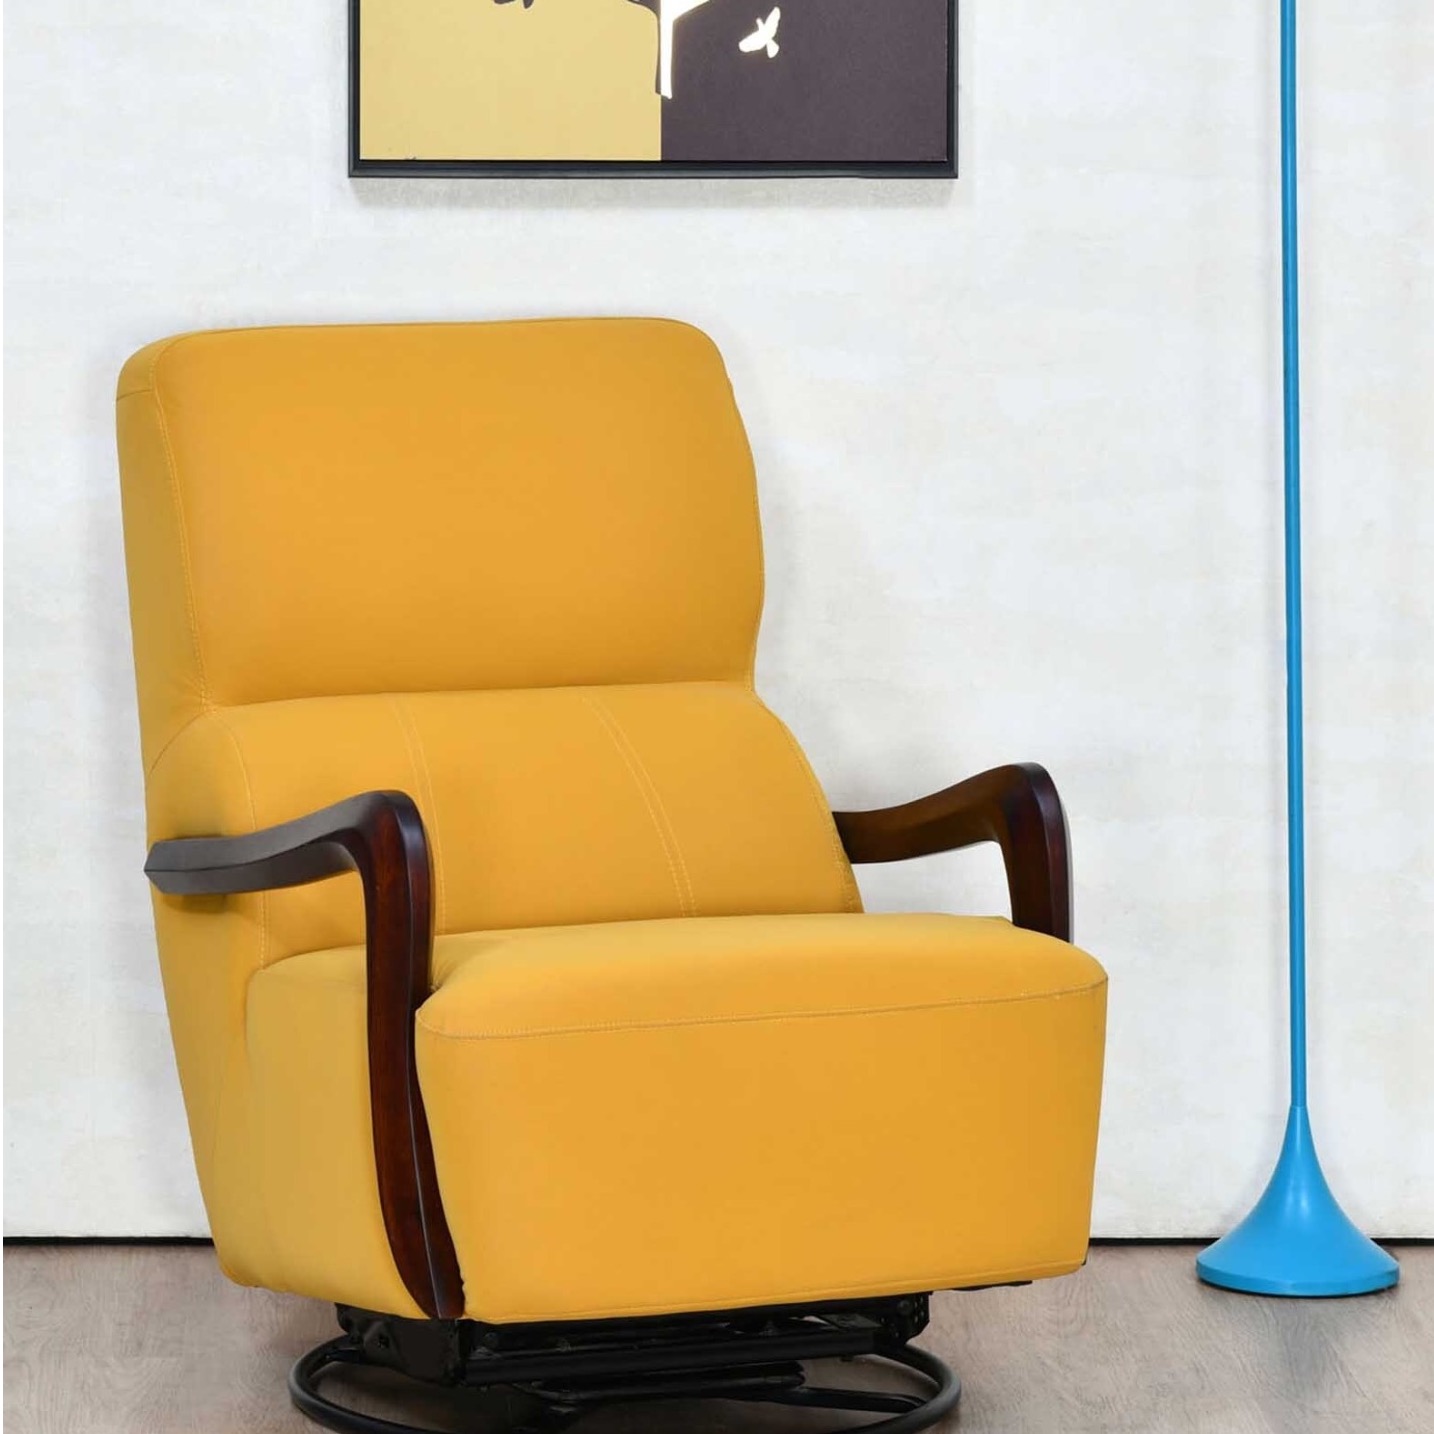  Buy Rocking Chair With Swivel in Mustard Yellow Colour  Online